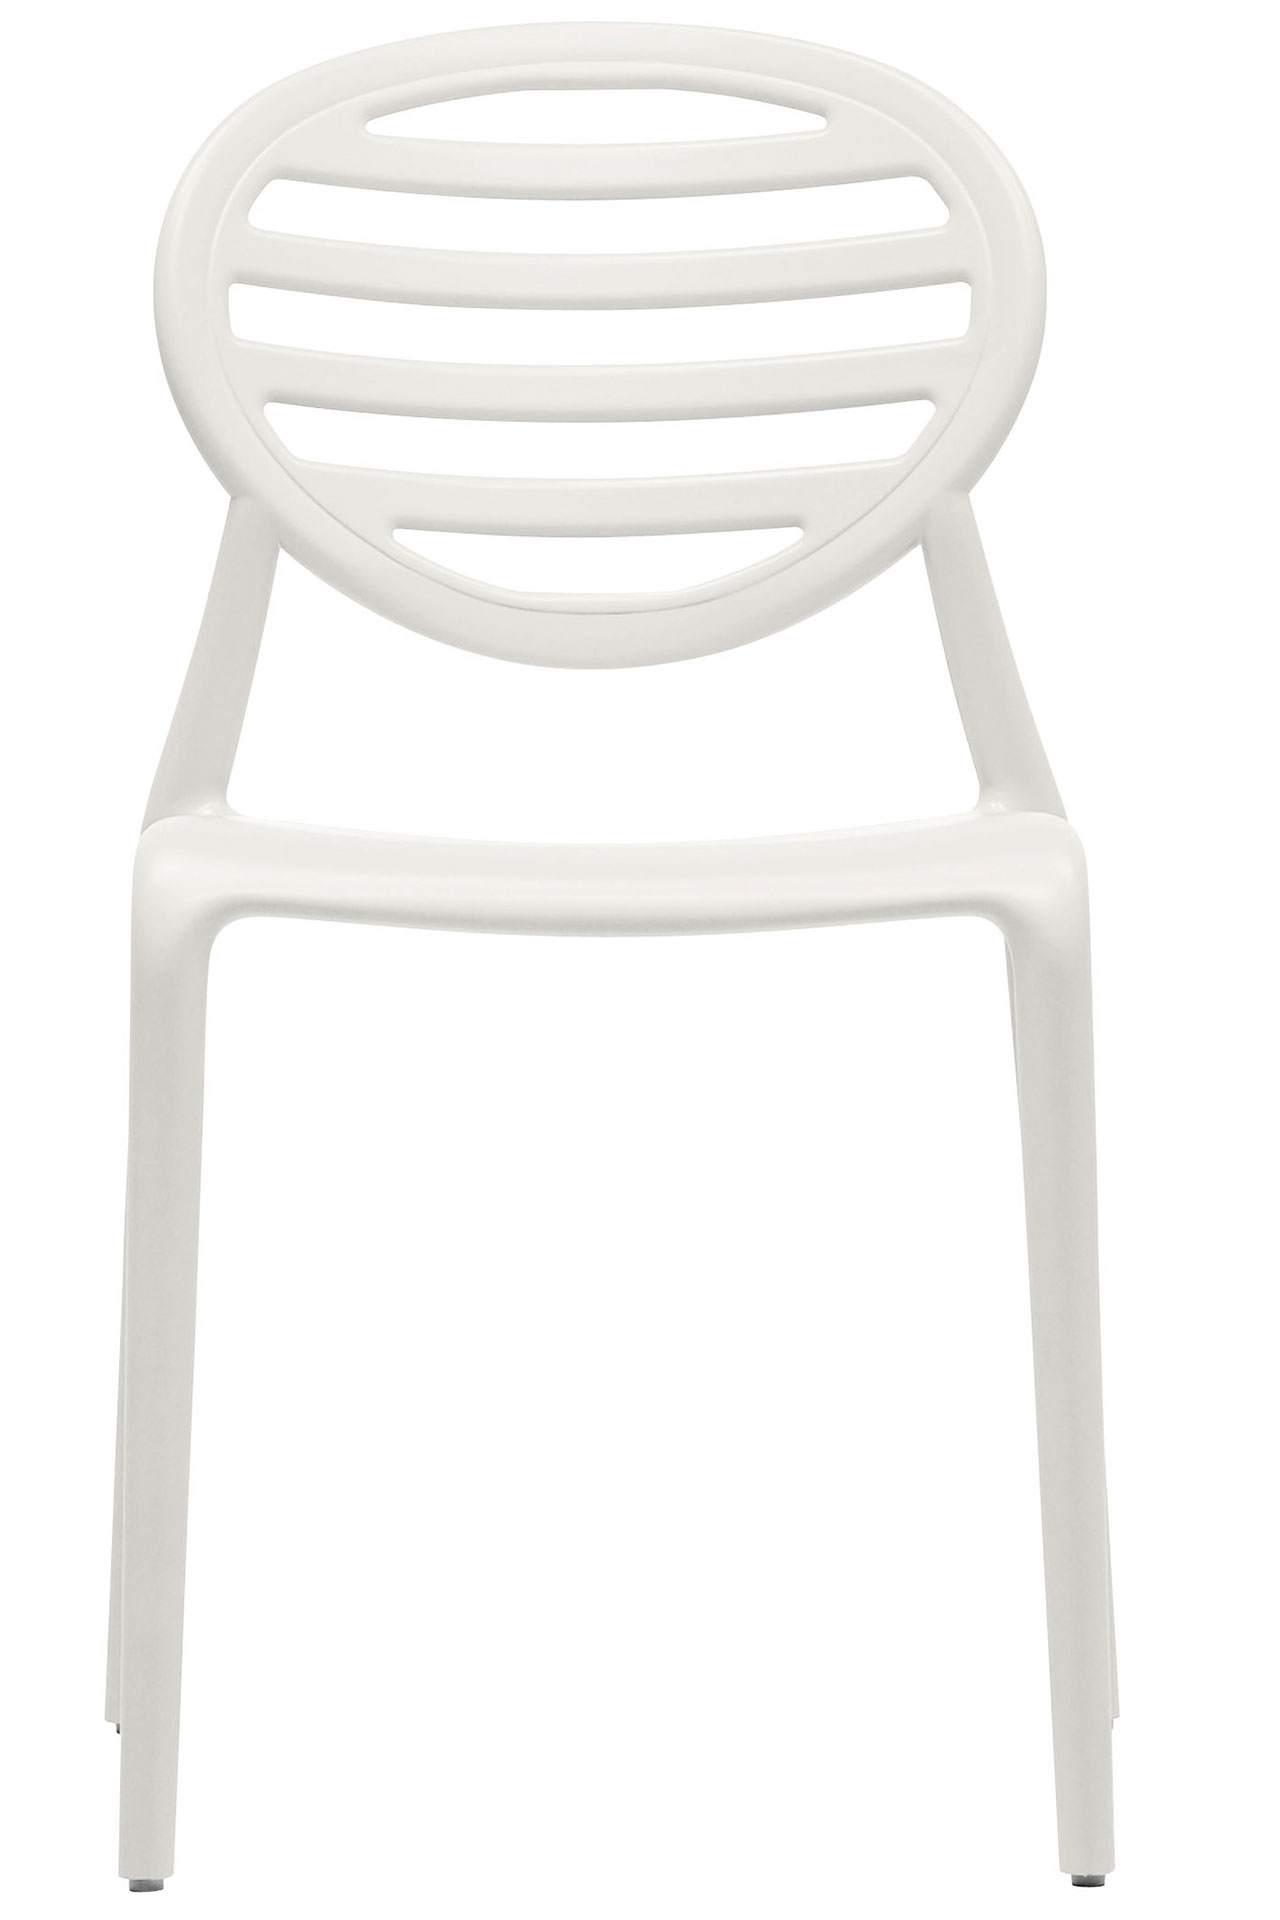 TOP GIO Chair